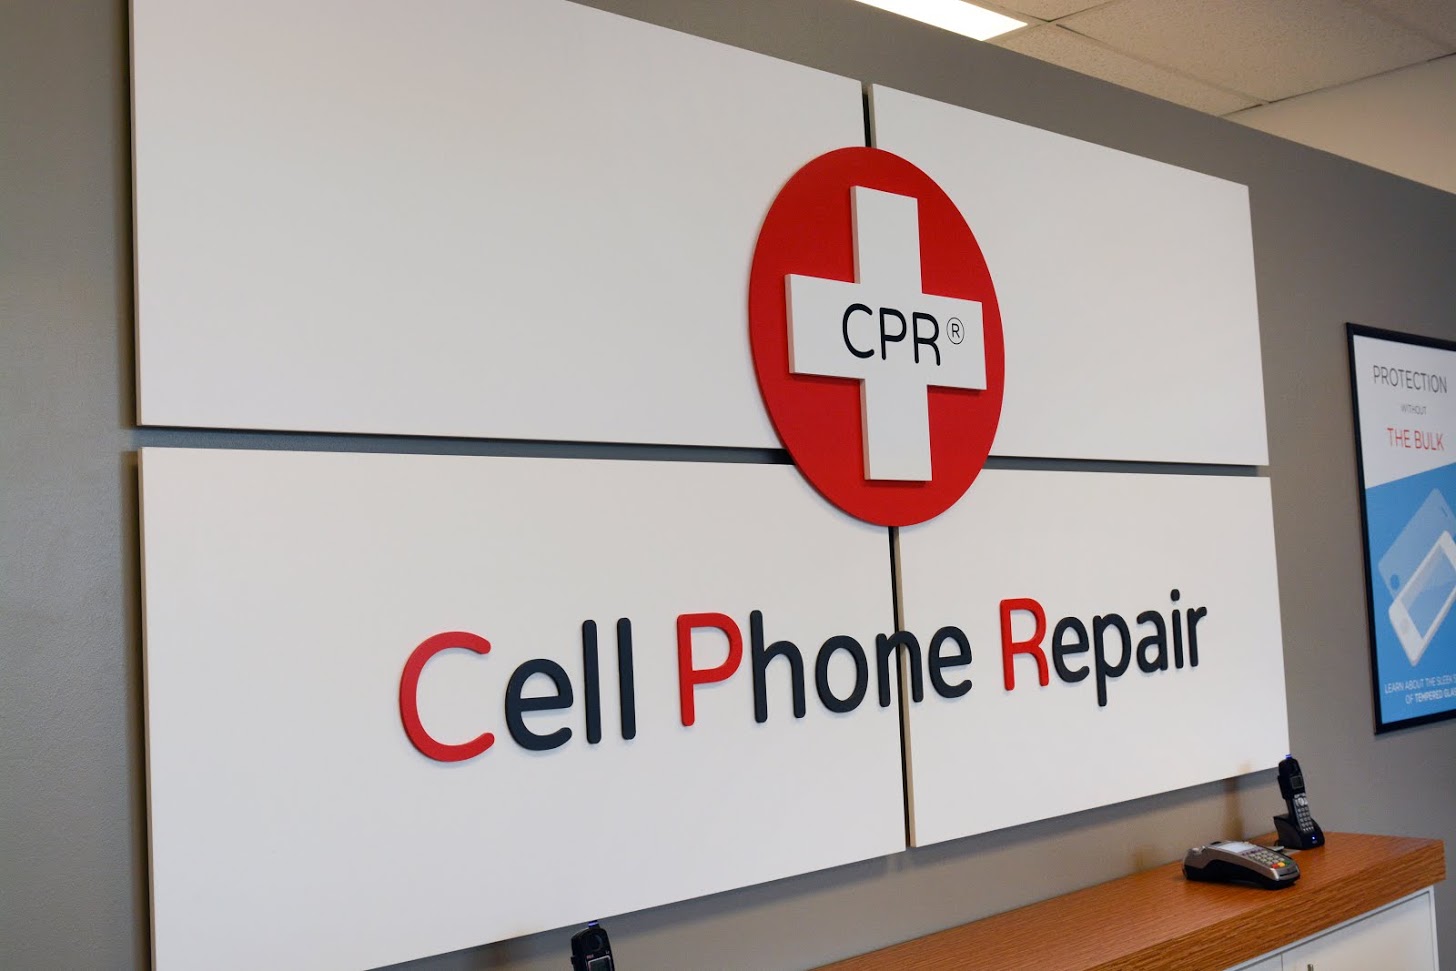 CPR Cell Phone Repair, Thursday, September 5, 2019, Press release picture